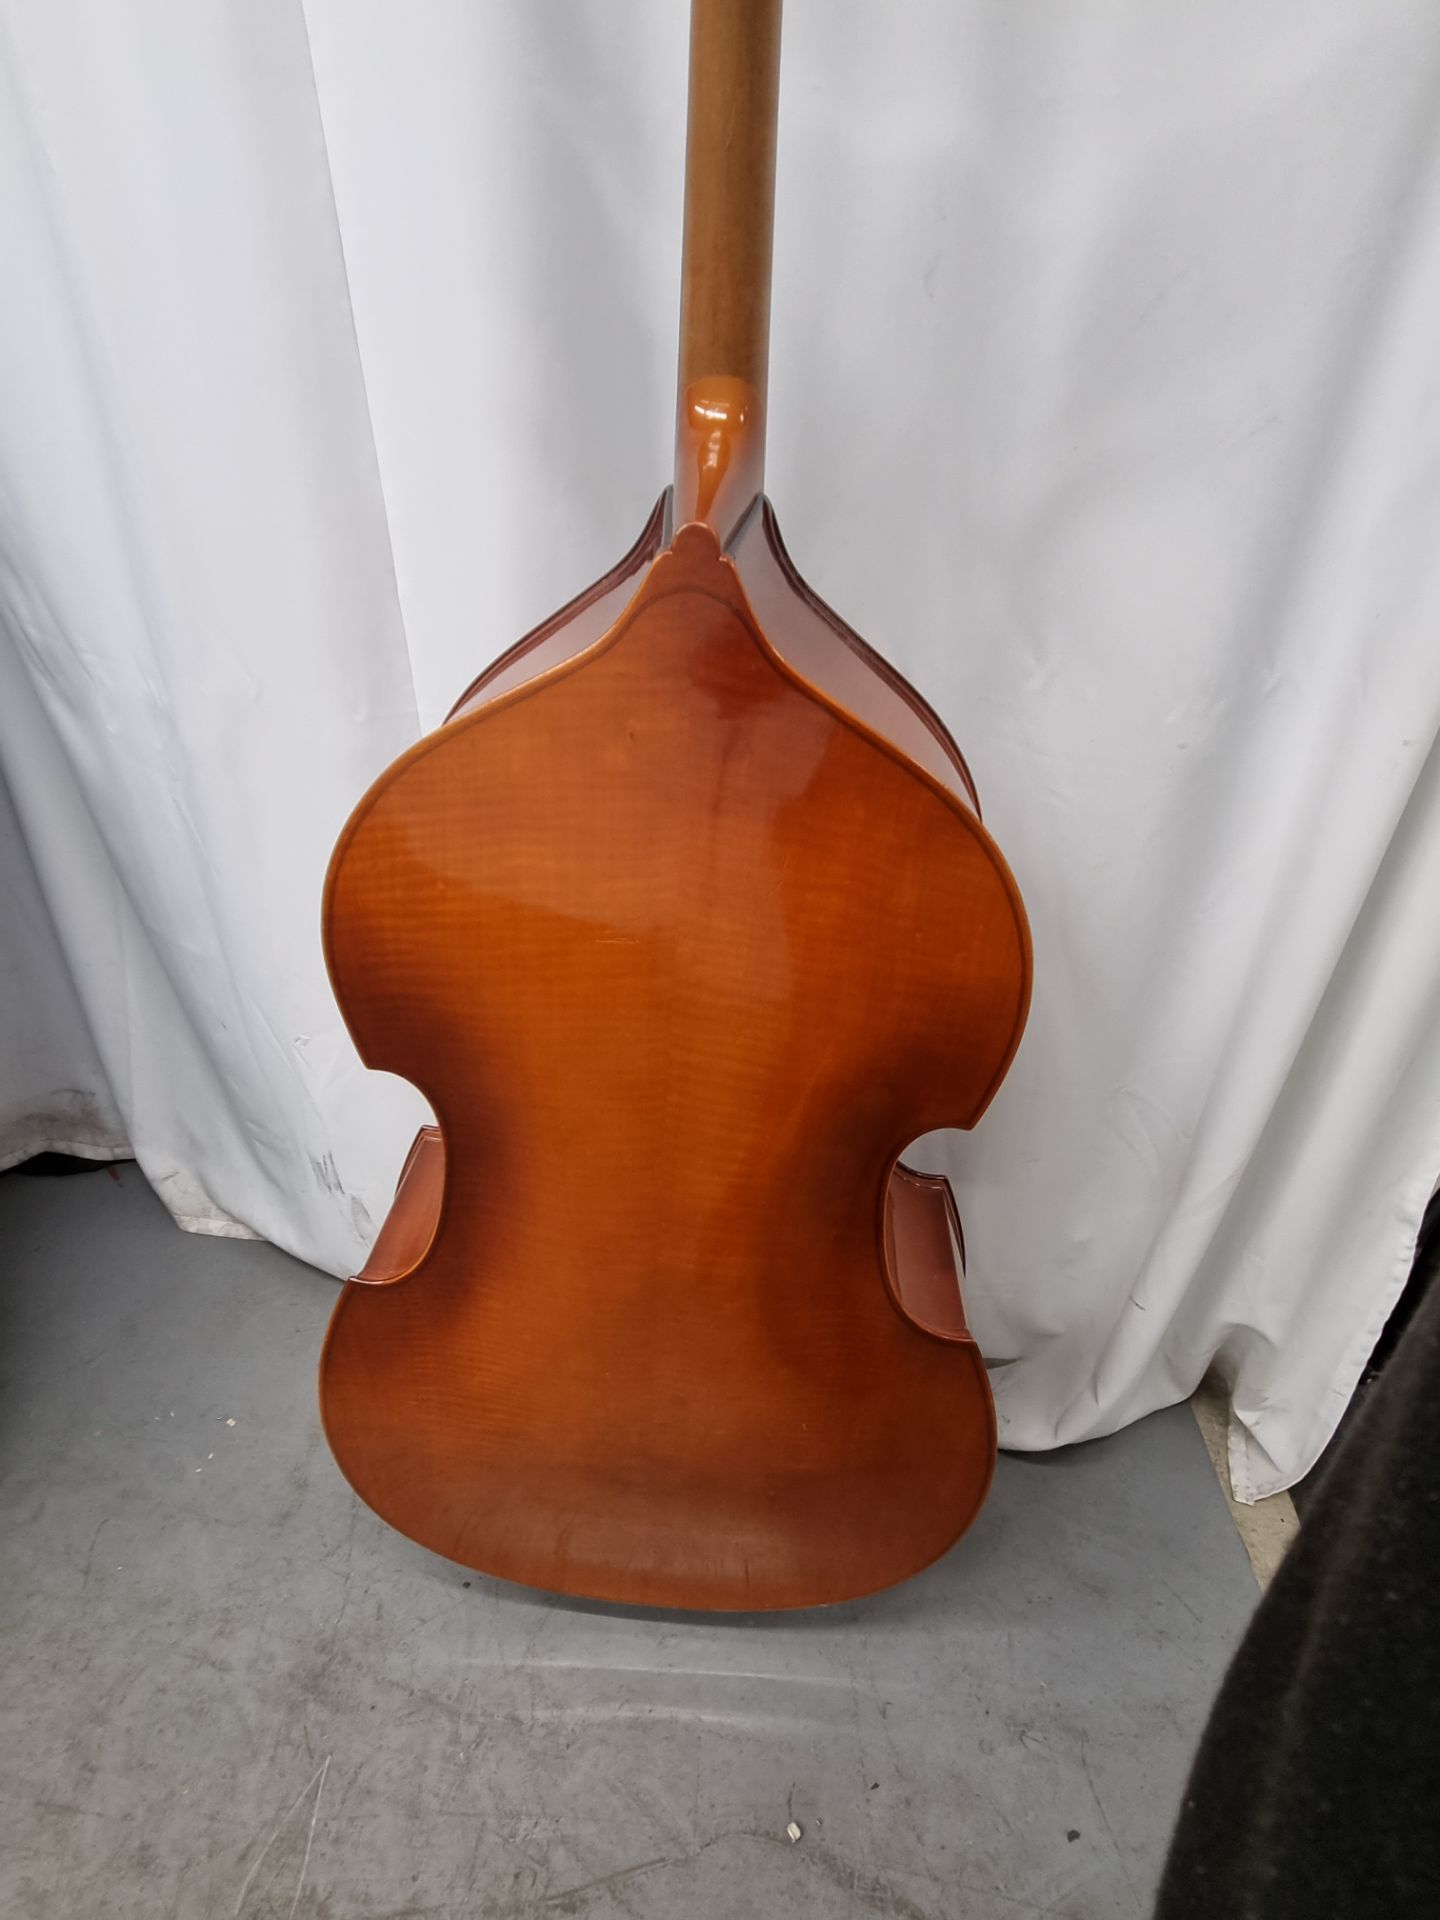 Roderich Paesold 590P Double bass & case - Image 11 of 30